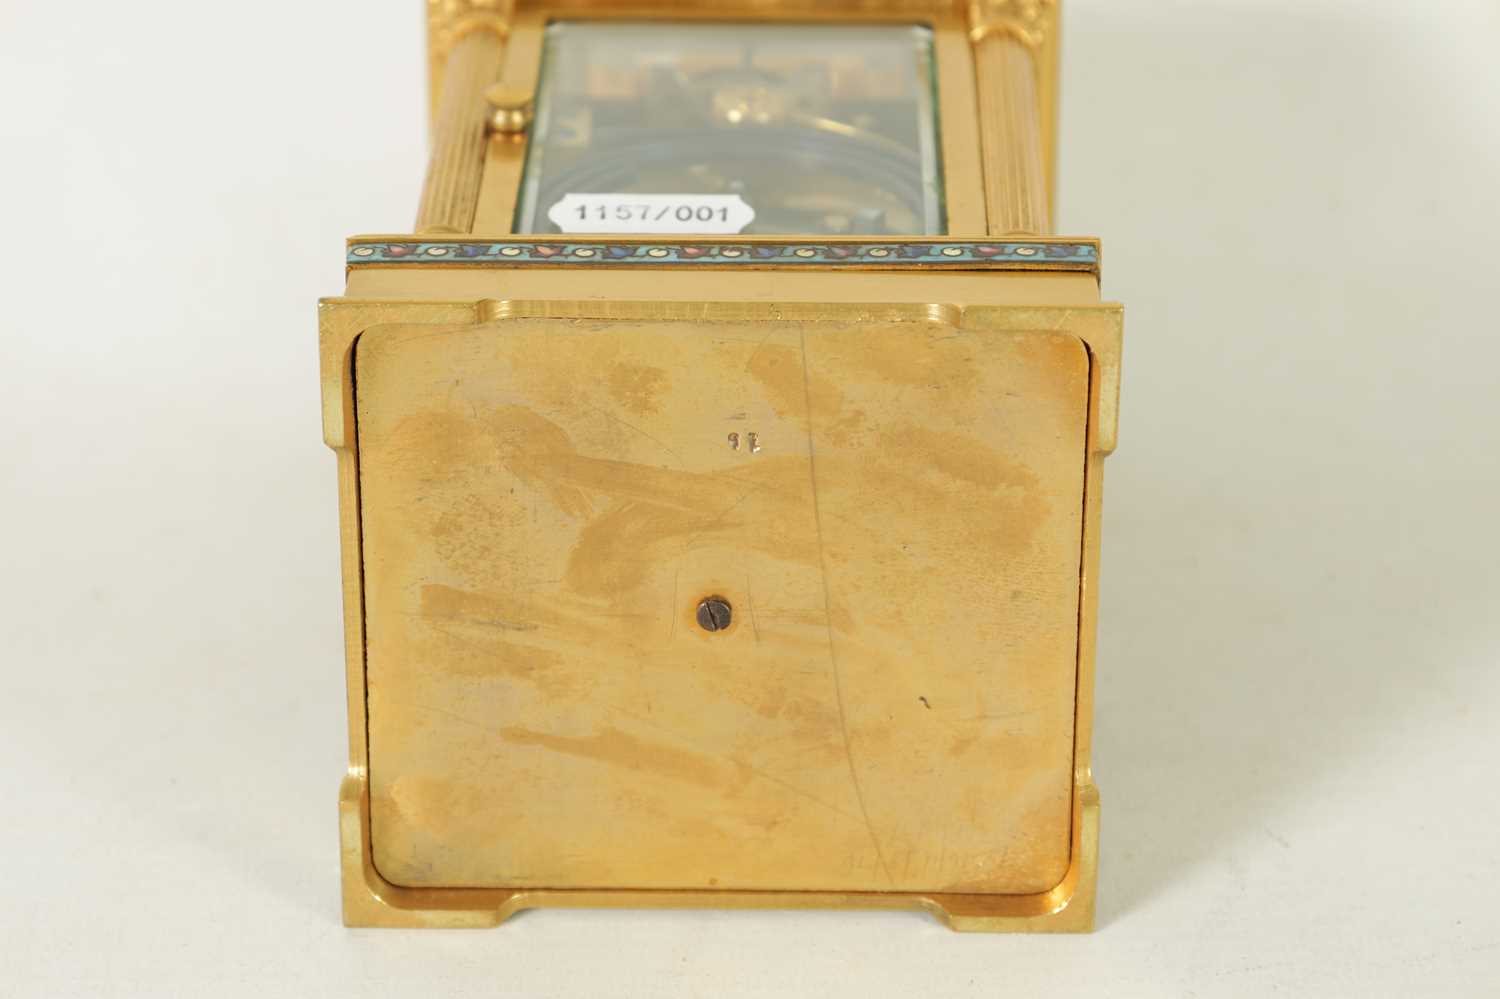 A LATE 19TH CENTURY FRENCH GILT BRASS AND CHAMPLEVE ENAMEL REPEATING CARRIAGE CLOCK - Image 10 of 10